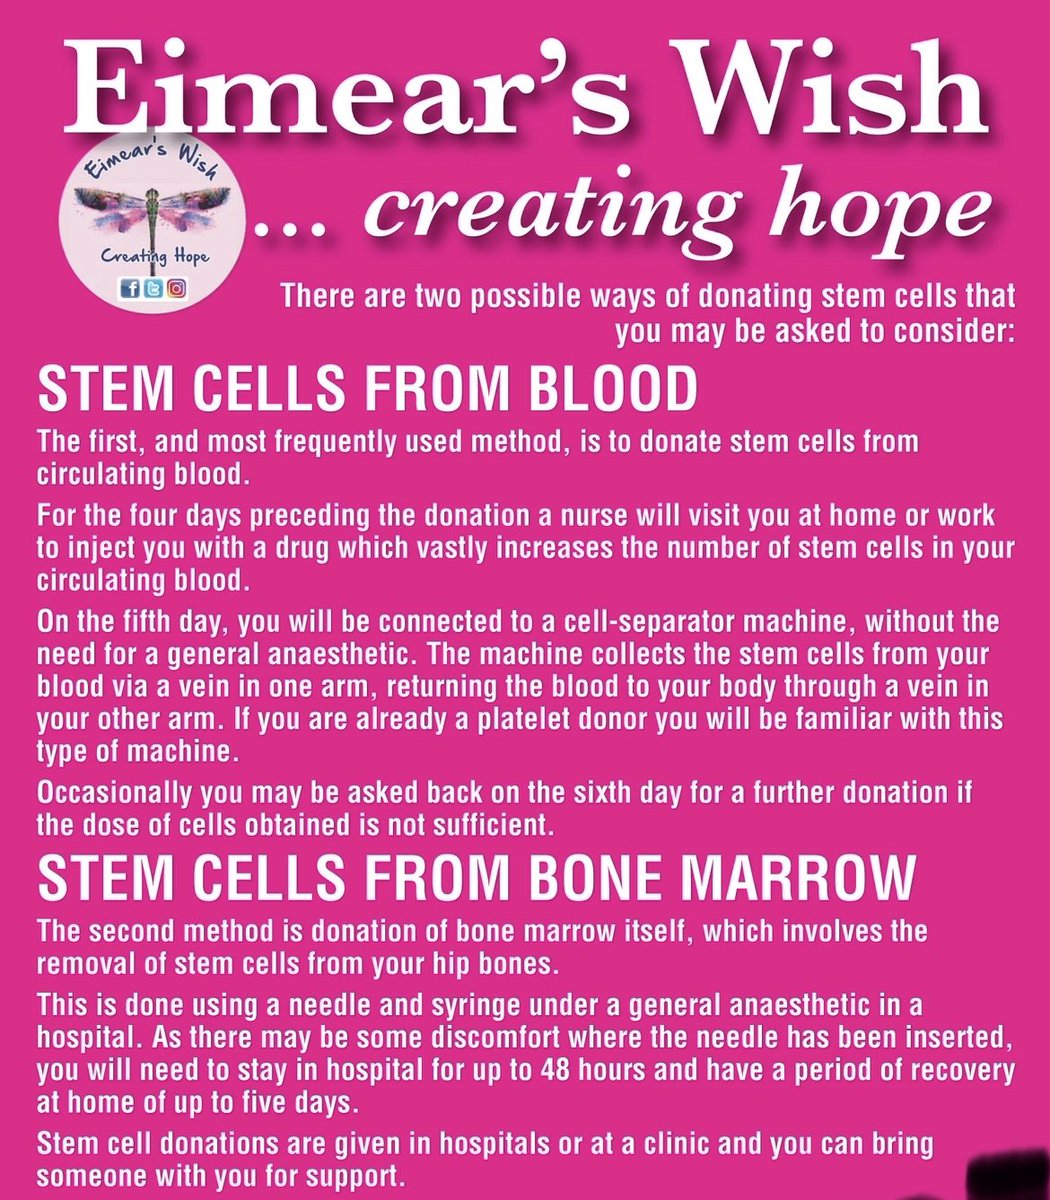 Help us raise stem cell donor awareness and you could win, 2, PINK in Dublin concert tickets, on Thursday 20 June. 2, return train tickets, 1. nights hotel stay. Entry cost £10. to enter scan the QR code. Winner drawn on Monday 3 June. No cash alternative.